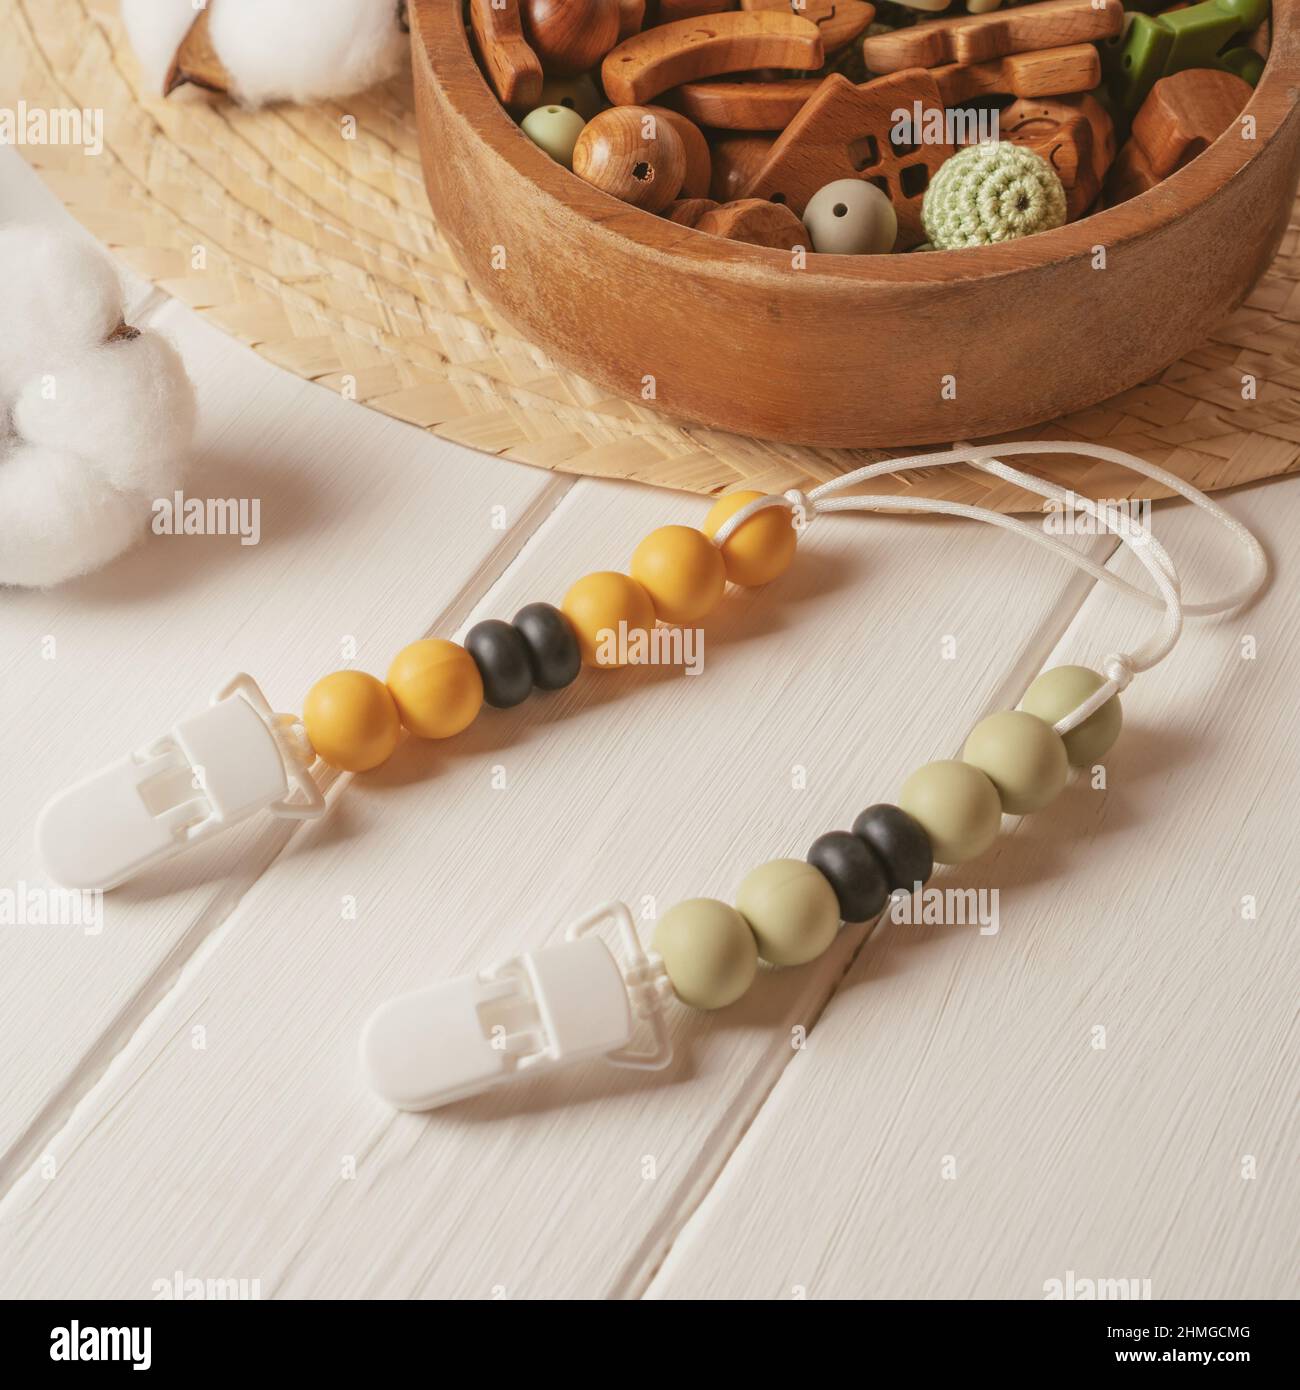 White plastic clothespin with white, black and orange wooden beads on white laces for baby pacifiers near wooden bowl with different beads on white wo Stock Photo